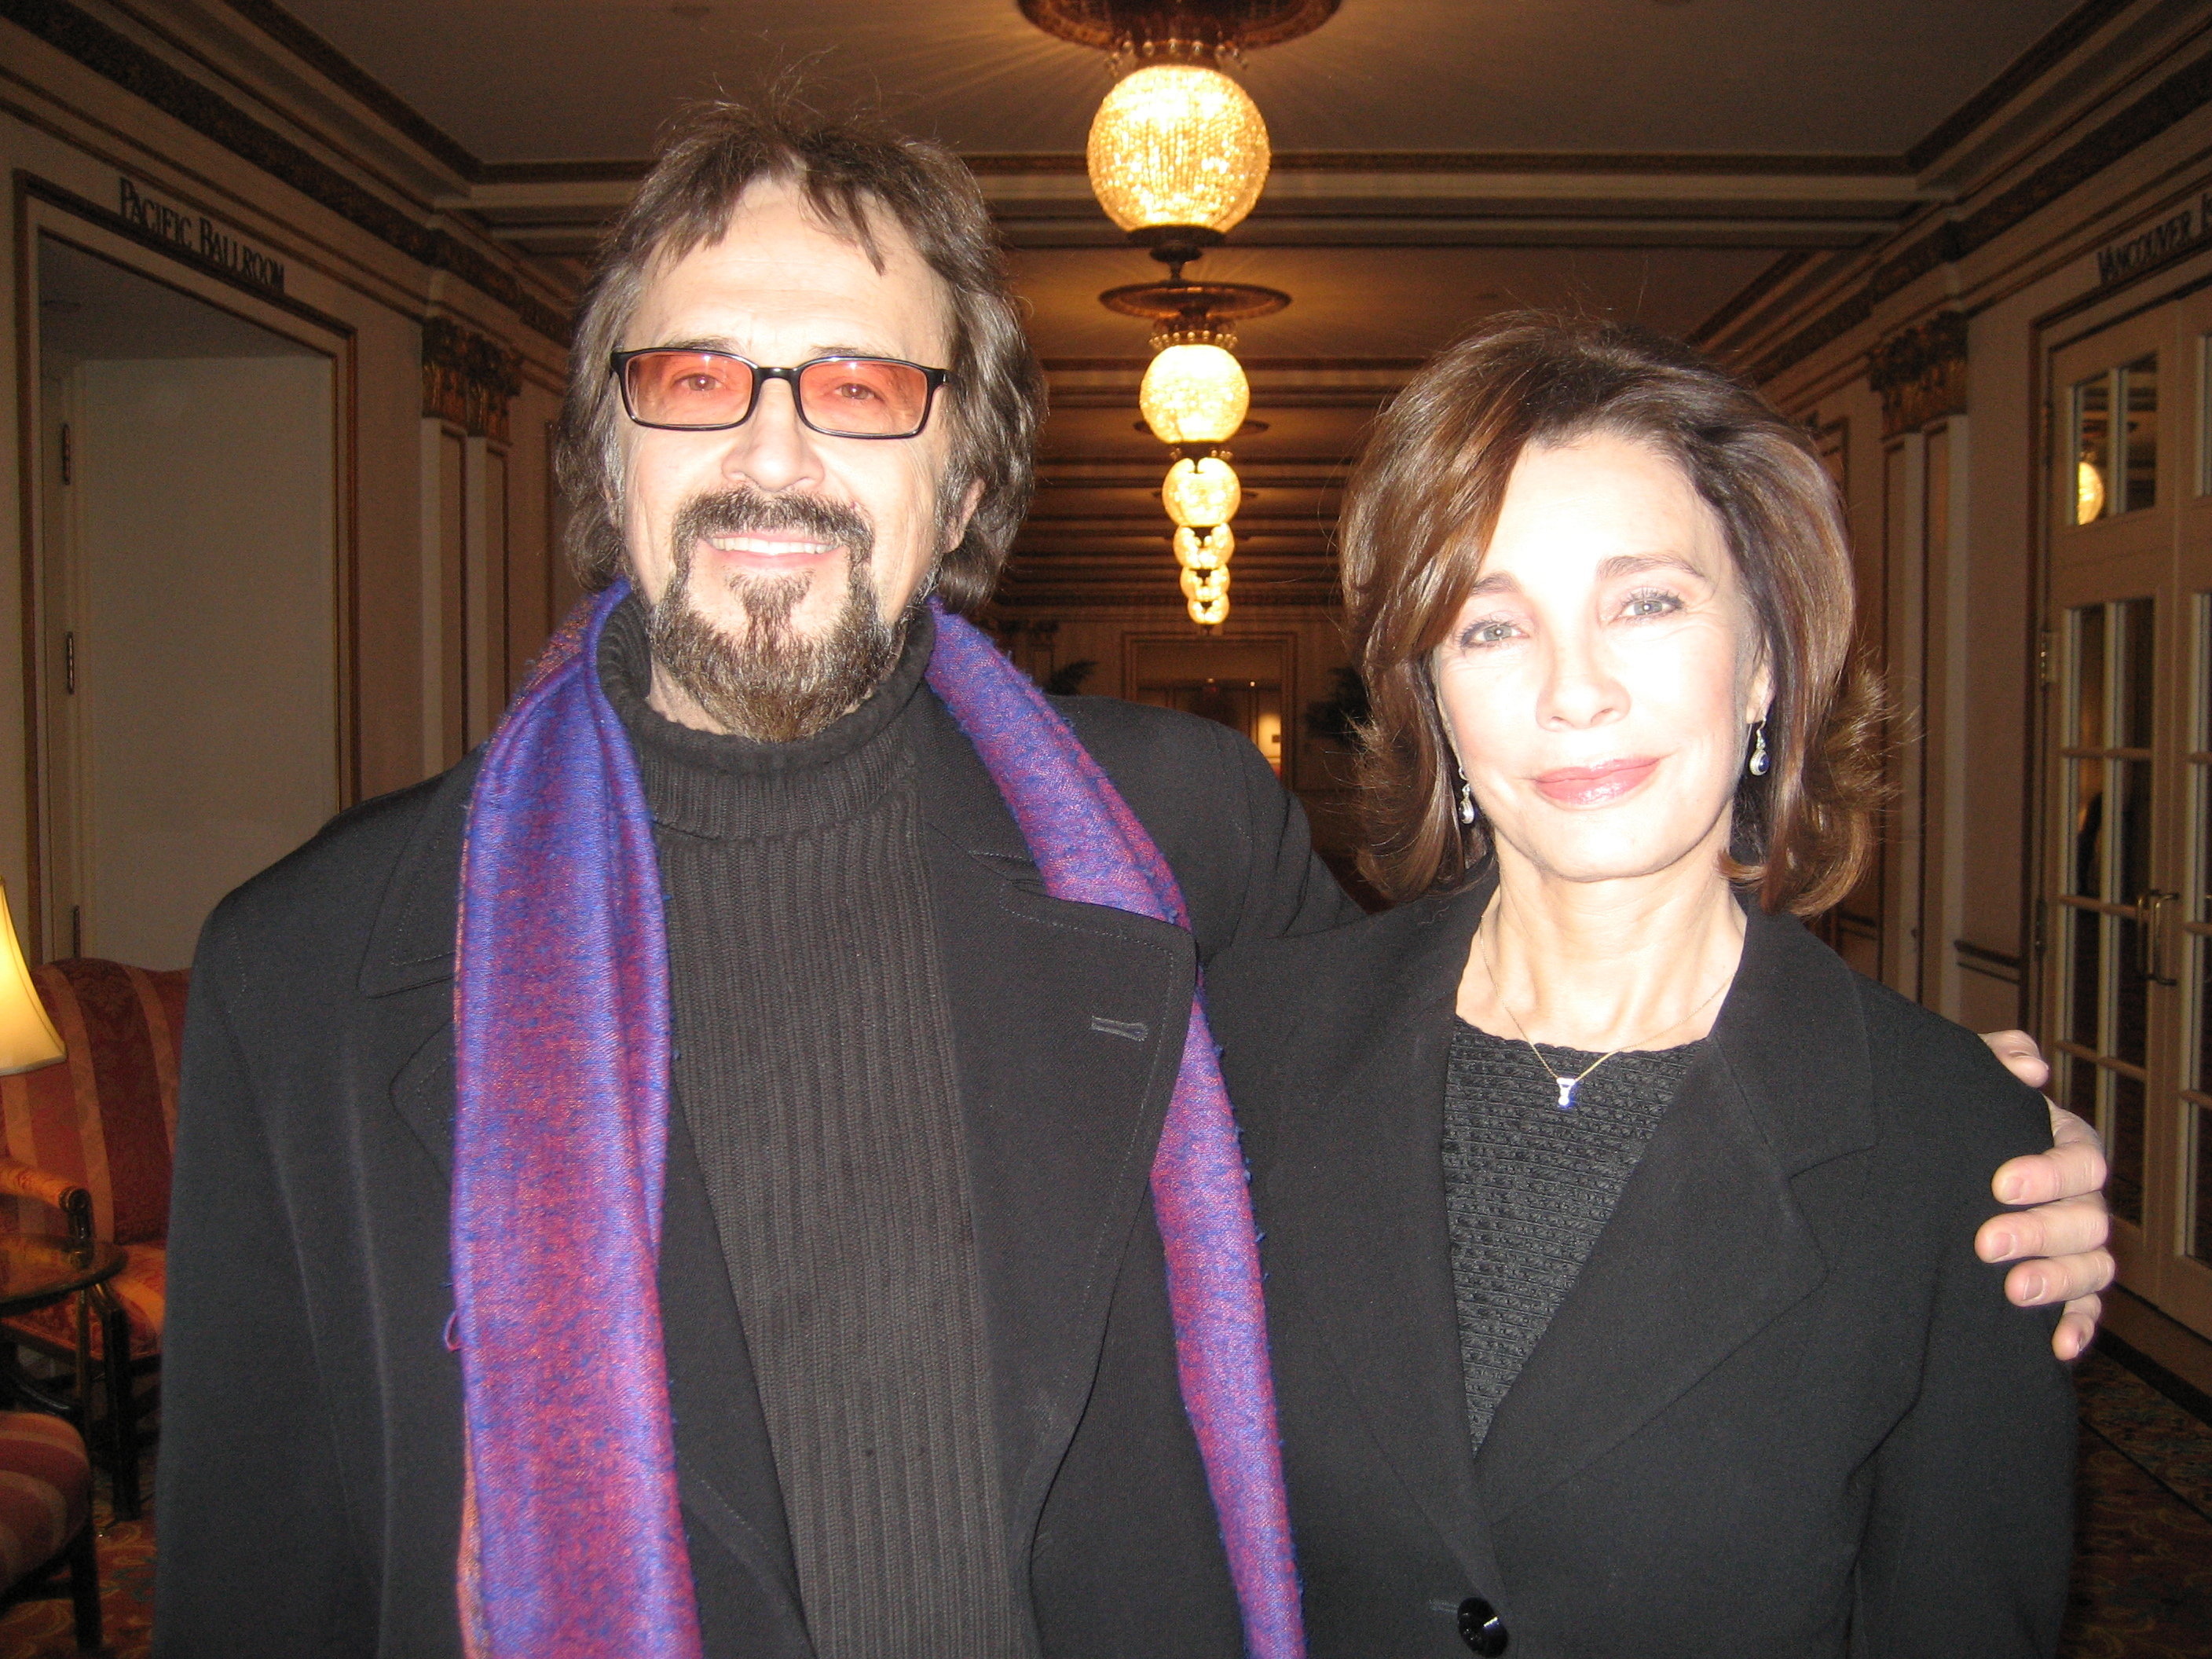 Anne Archer and writer/director George Mendeluk on the White House set for 